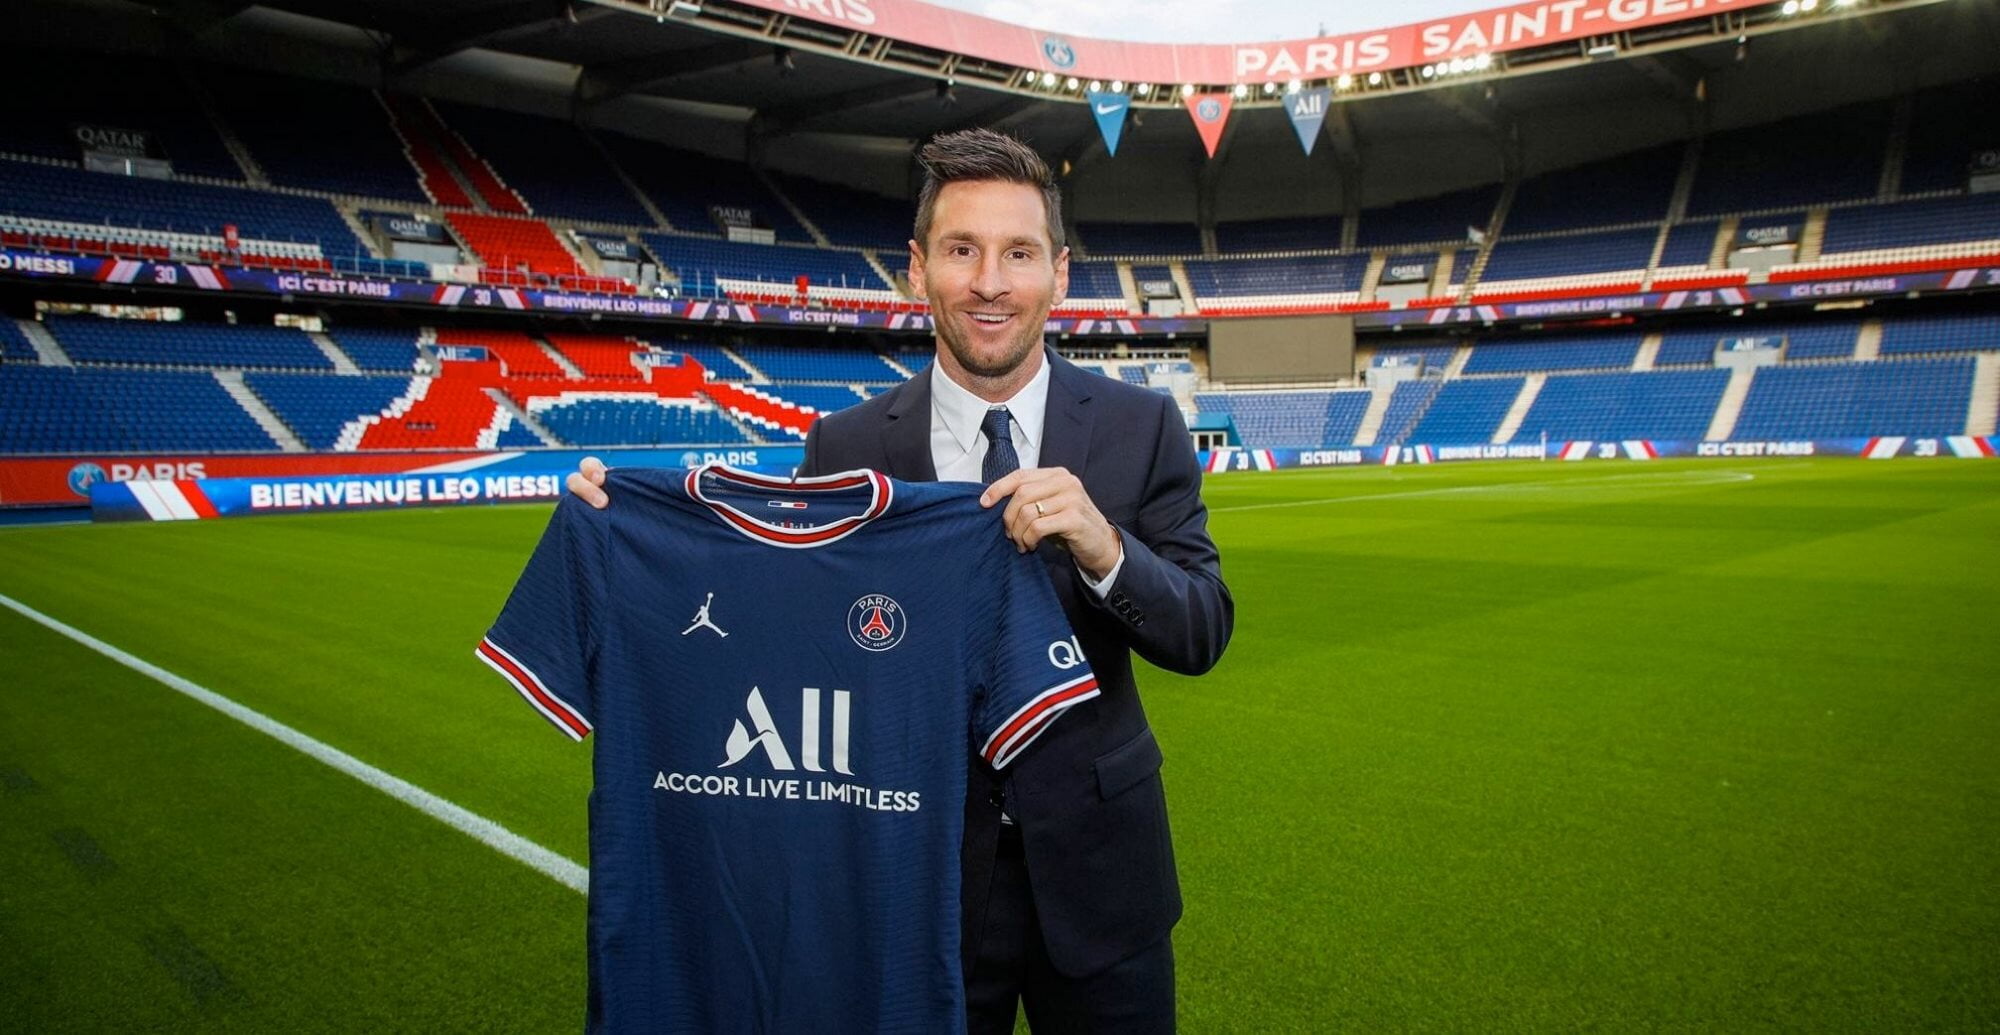 Lionel Messi signs for PSG!